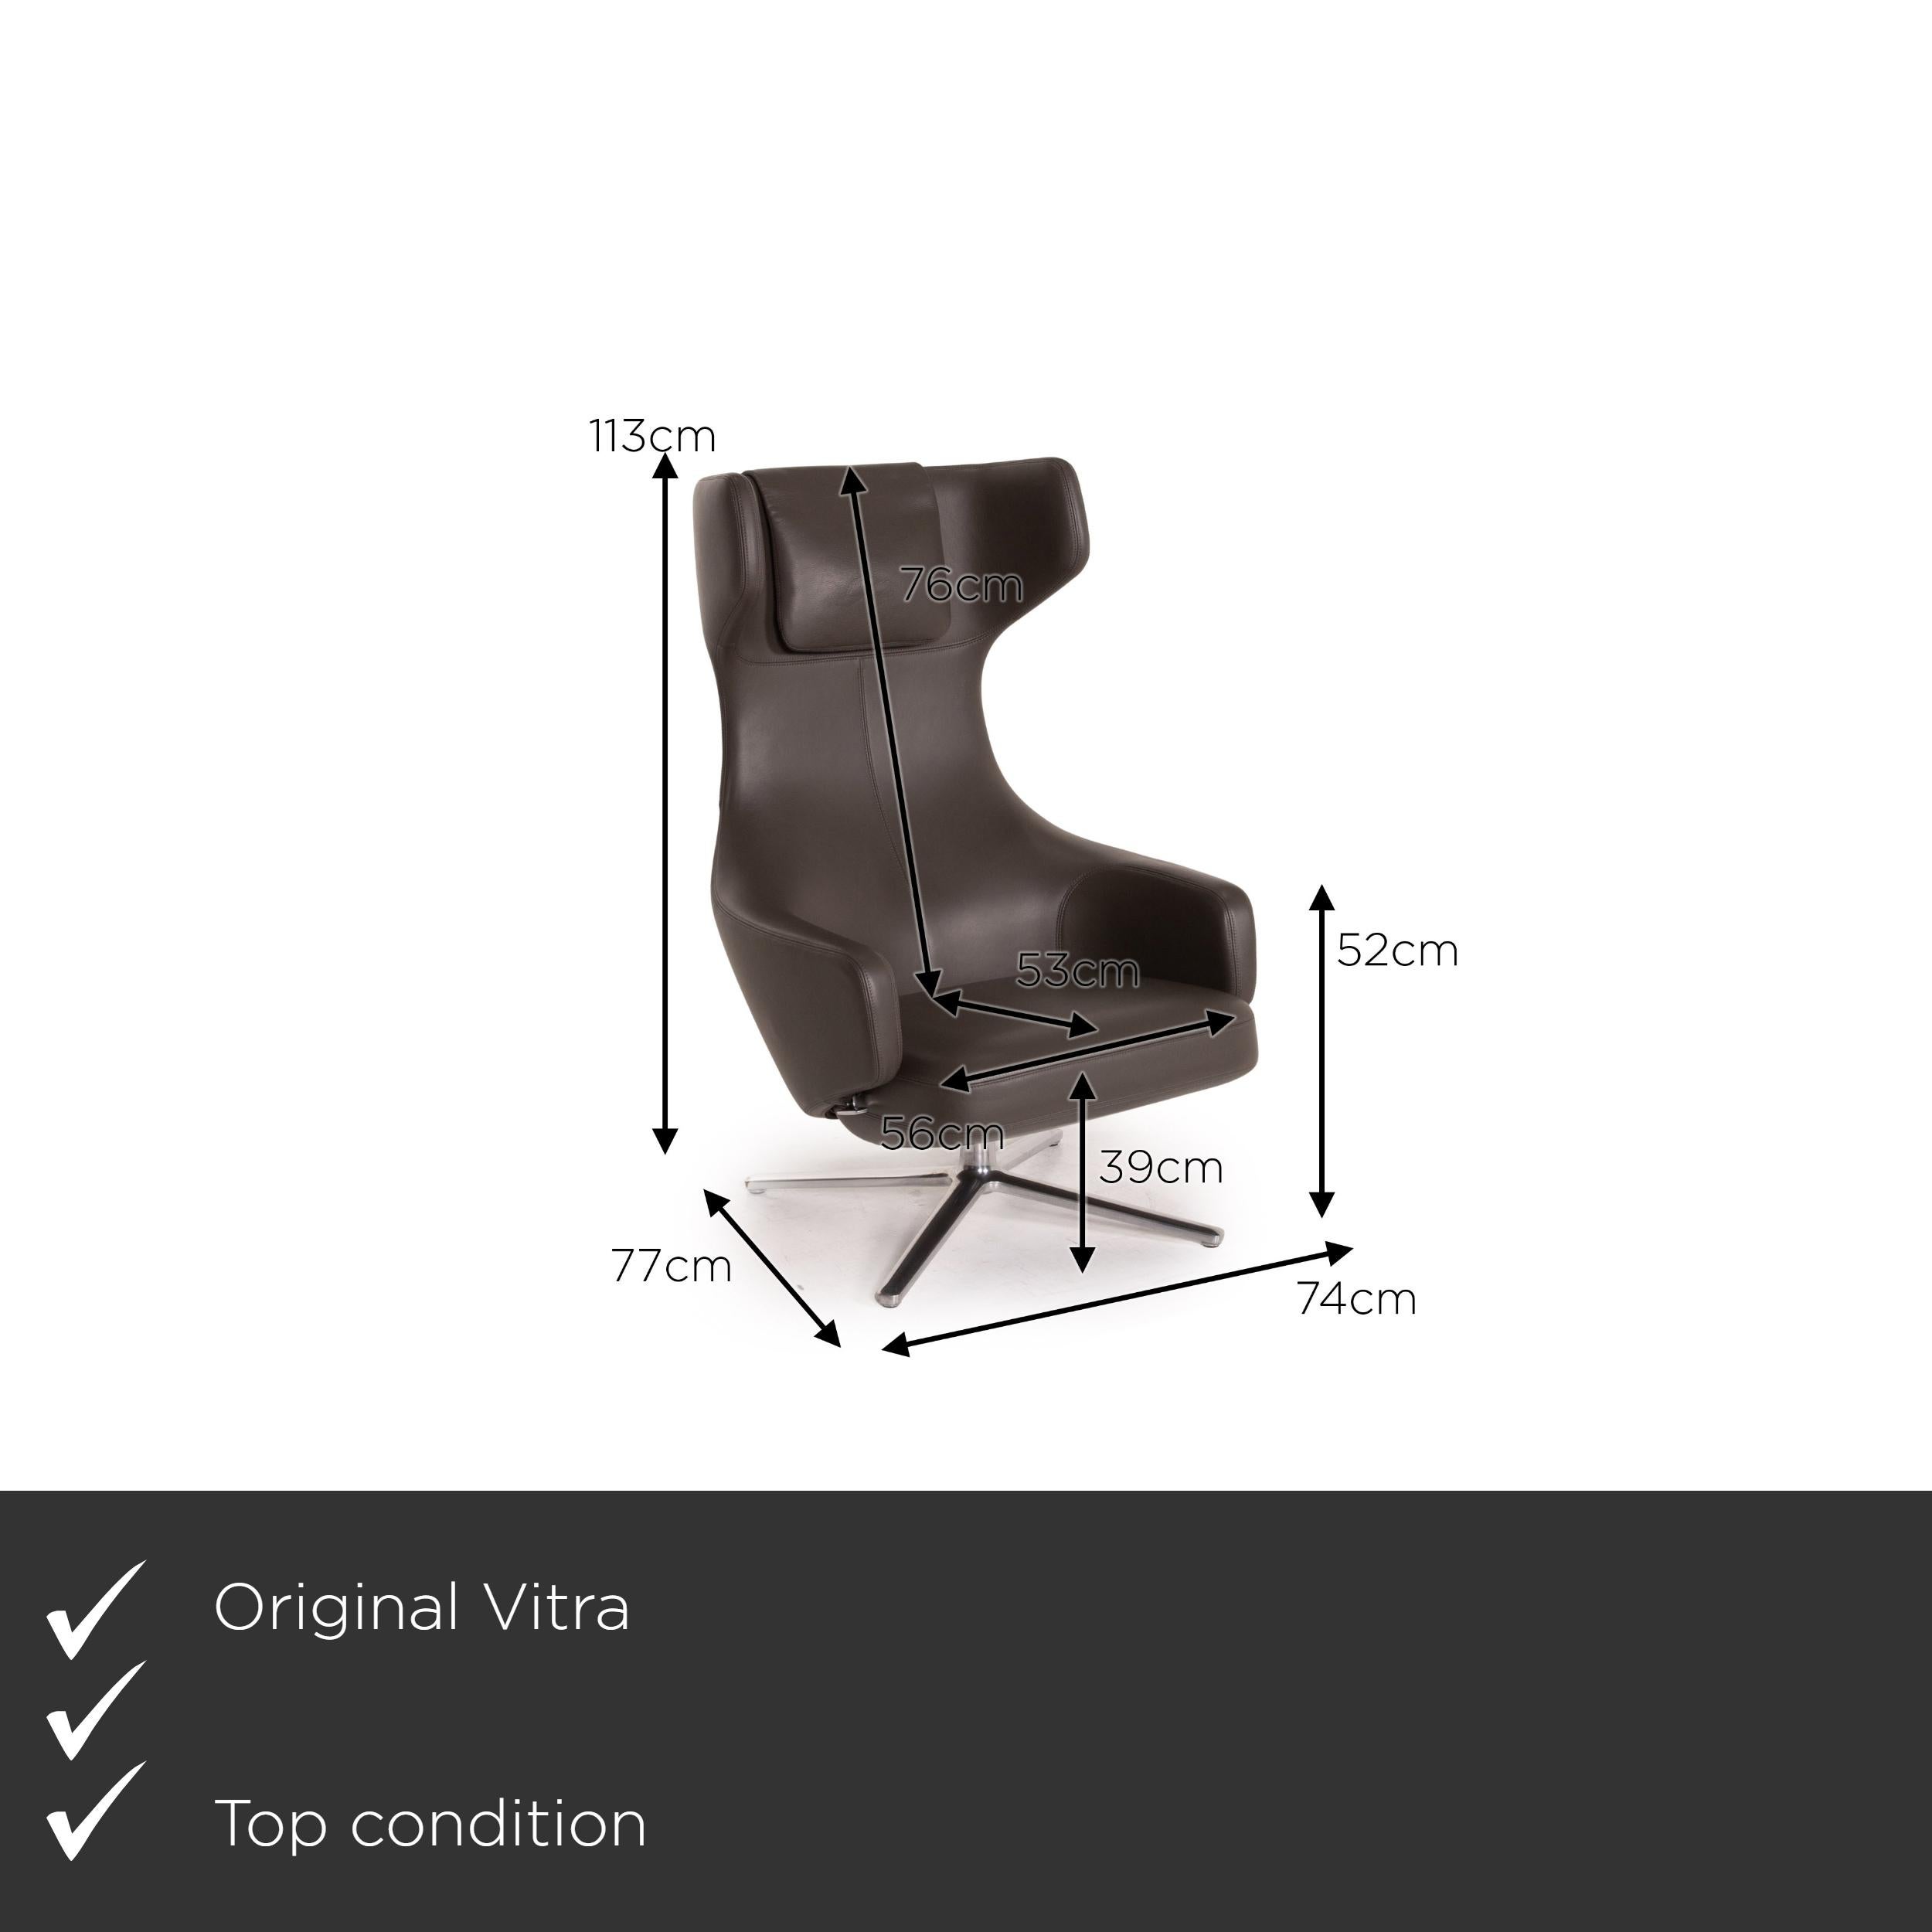 We present to you a Vitra Grand Repos leather armchair gray dark gray function wing chair.


 Product measurements in centimeters:
 

Depth: 77
Width: 74
Height: 113
Seat height: 39
Rest height: 52
Seat depth: 53
Seat width: 56
Back